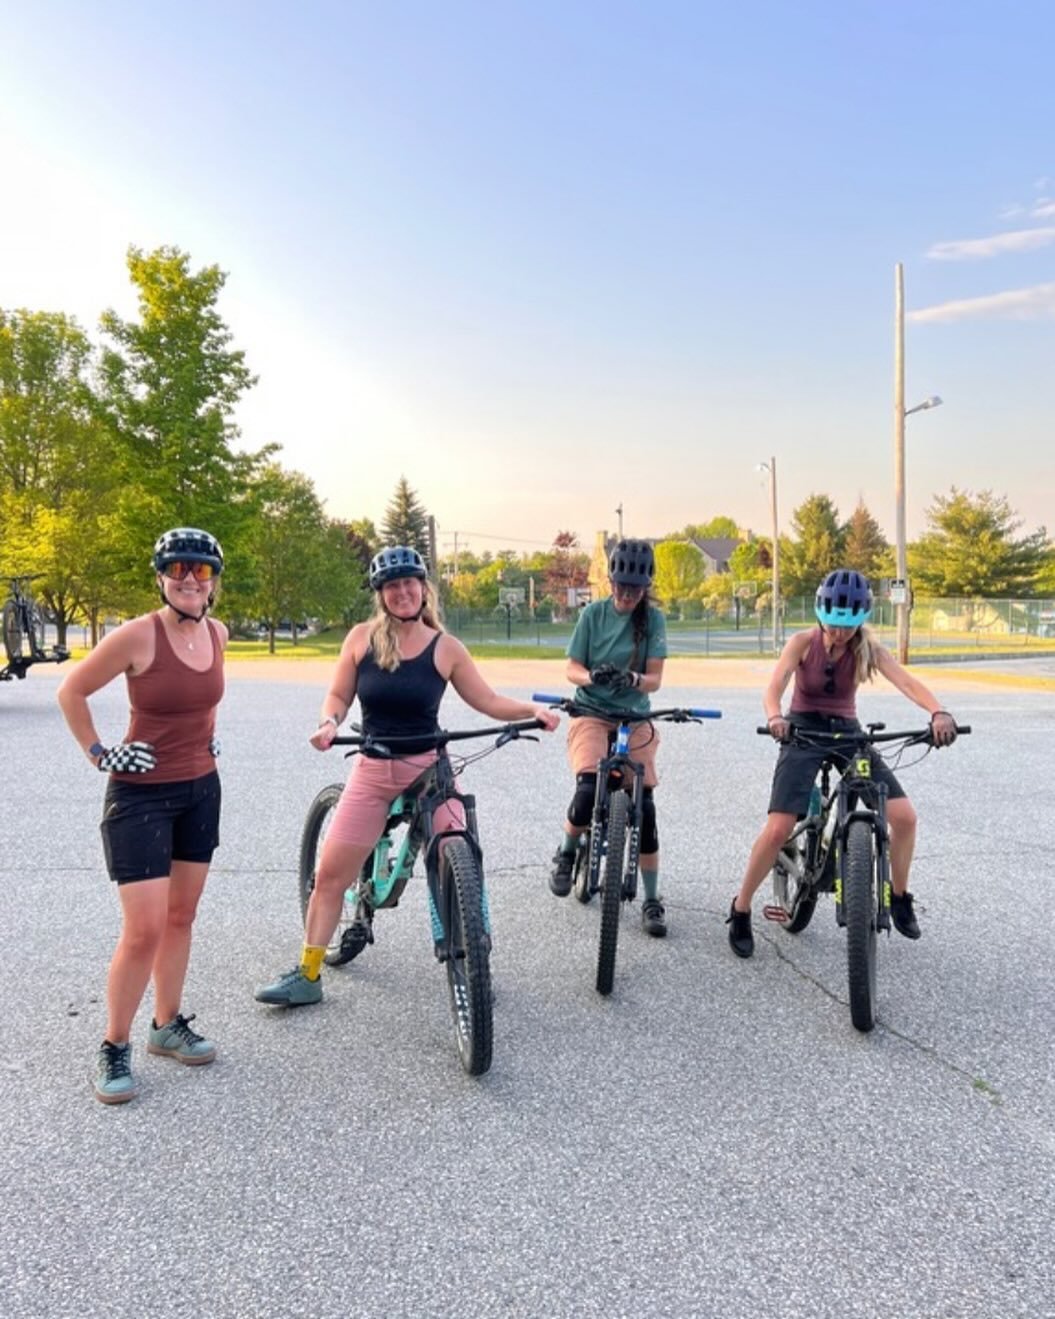 TONIGHT! Join us in Danville to tune up your core and lengthen your muscles in Lilias&rsquo; 5:30pm Pilates class. Followed by a 1 hour Intermediate Zone 2 (social but still a bit challenging) group gravel road bike ride. Sign up through the app for 